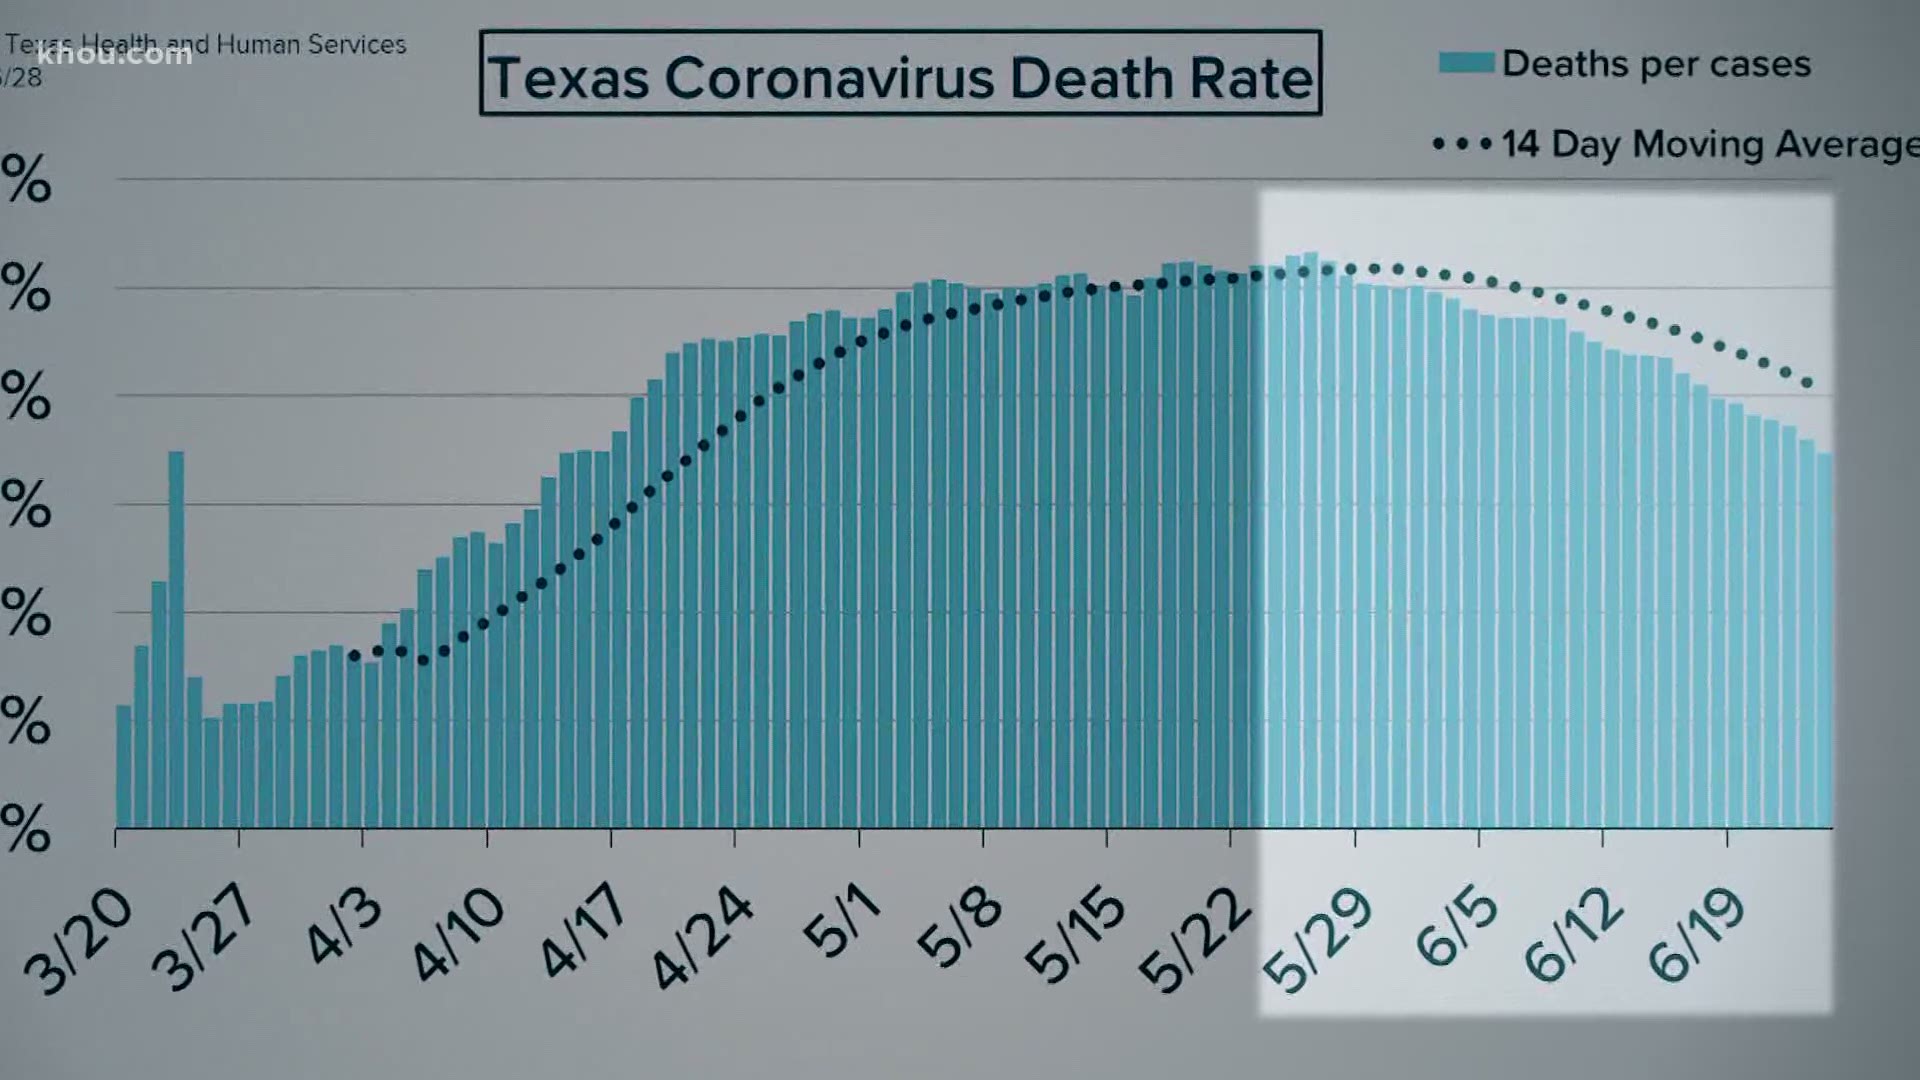 Texas has been hit particularly hard by COVID-19. Doctors say the numbers are moving in the wrong direction – except when it comes to deaths.